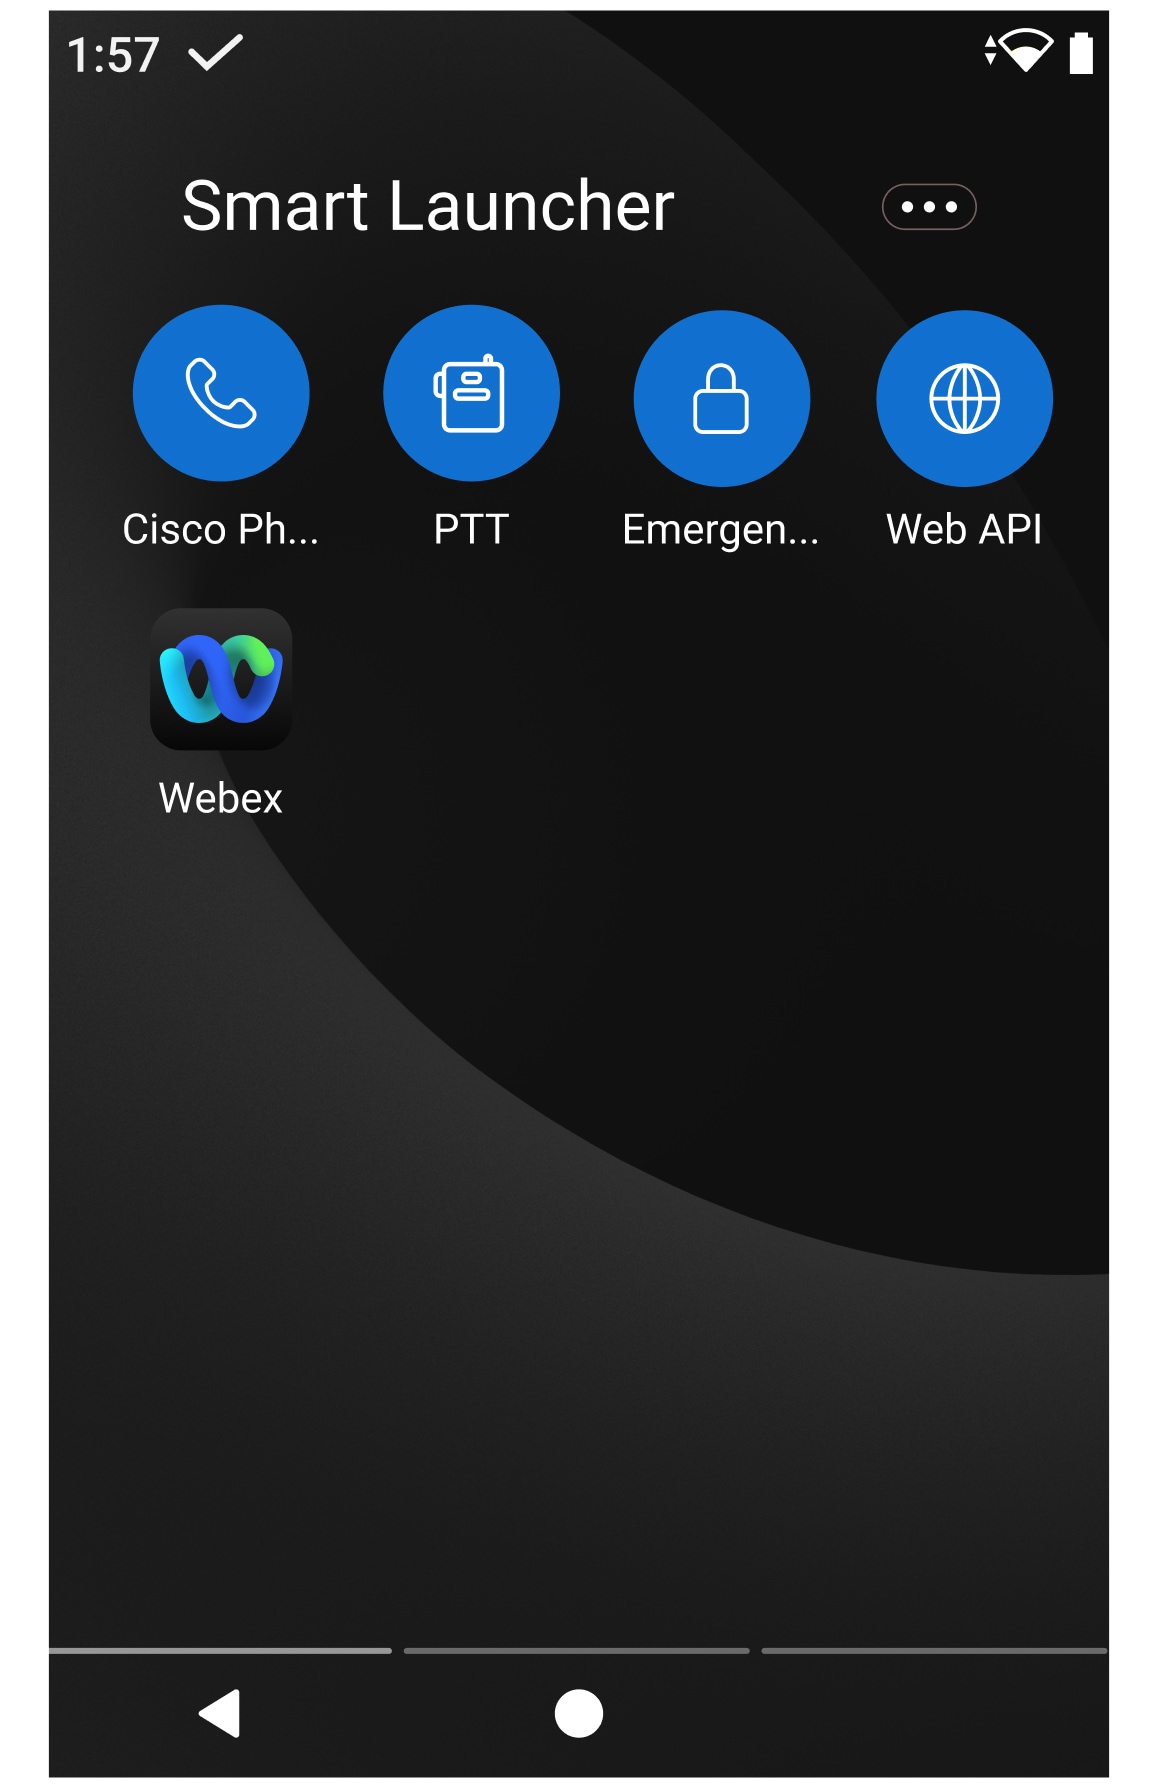 Dark background on the home screen of the phone with: narrow bar of status icons on the top. In the middle of the screen, is the label Smart Launcher, followed by an overflow menu and icons for five apps: Cisco Phone, PTT, Emergency, Web API, and Webex. At the bottom of the screen, are the Back and Home navigation icons.